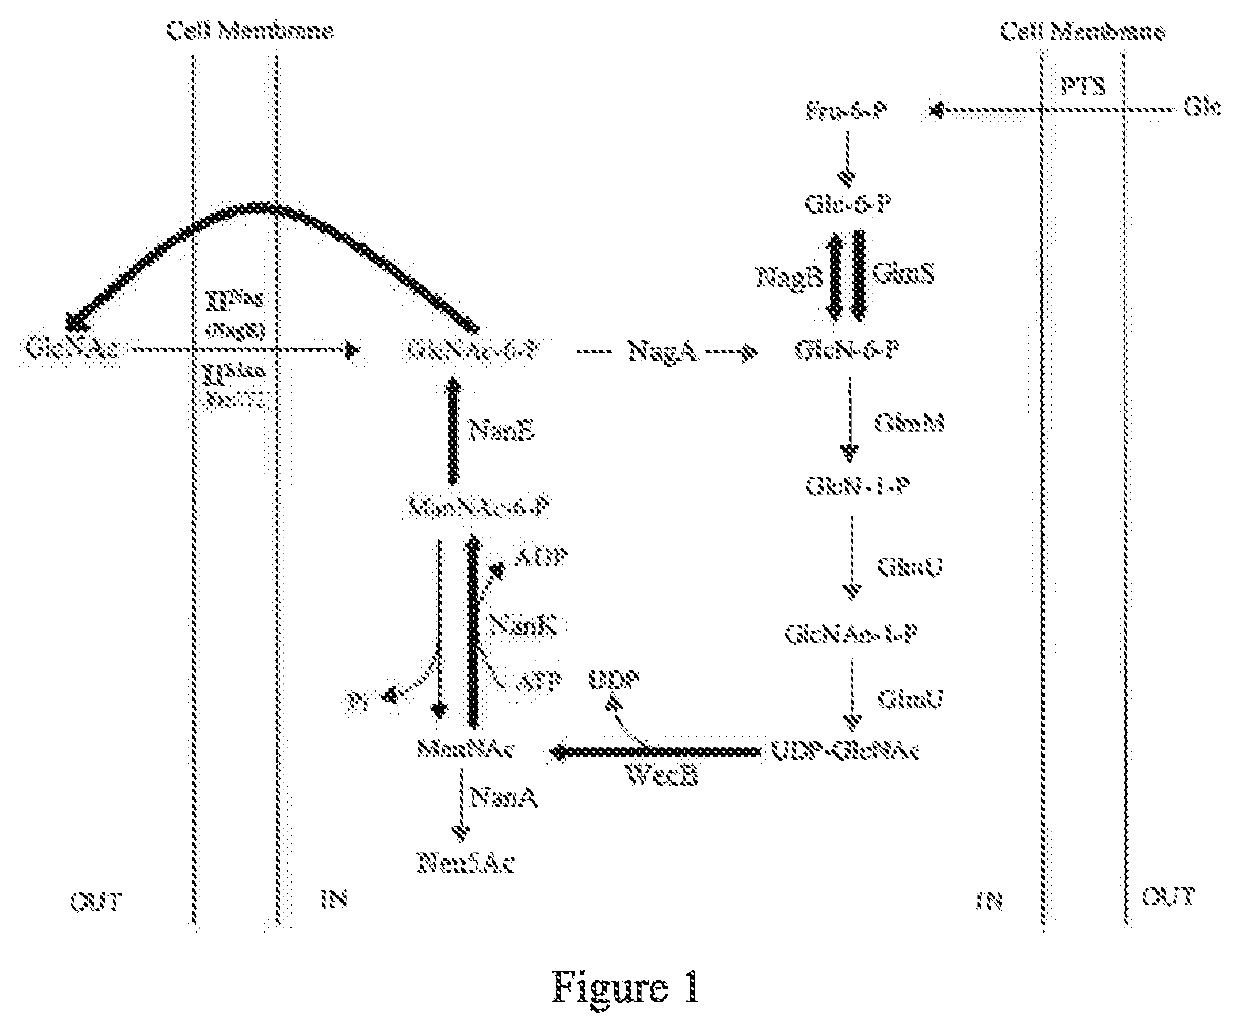 Method for producing n-acetyl-d-glucosamine and/or d-glucosamine salt by microbial fermentation